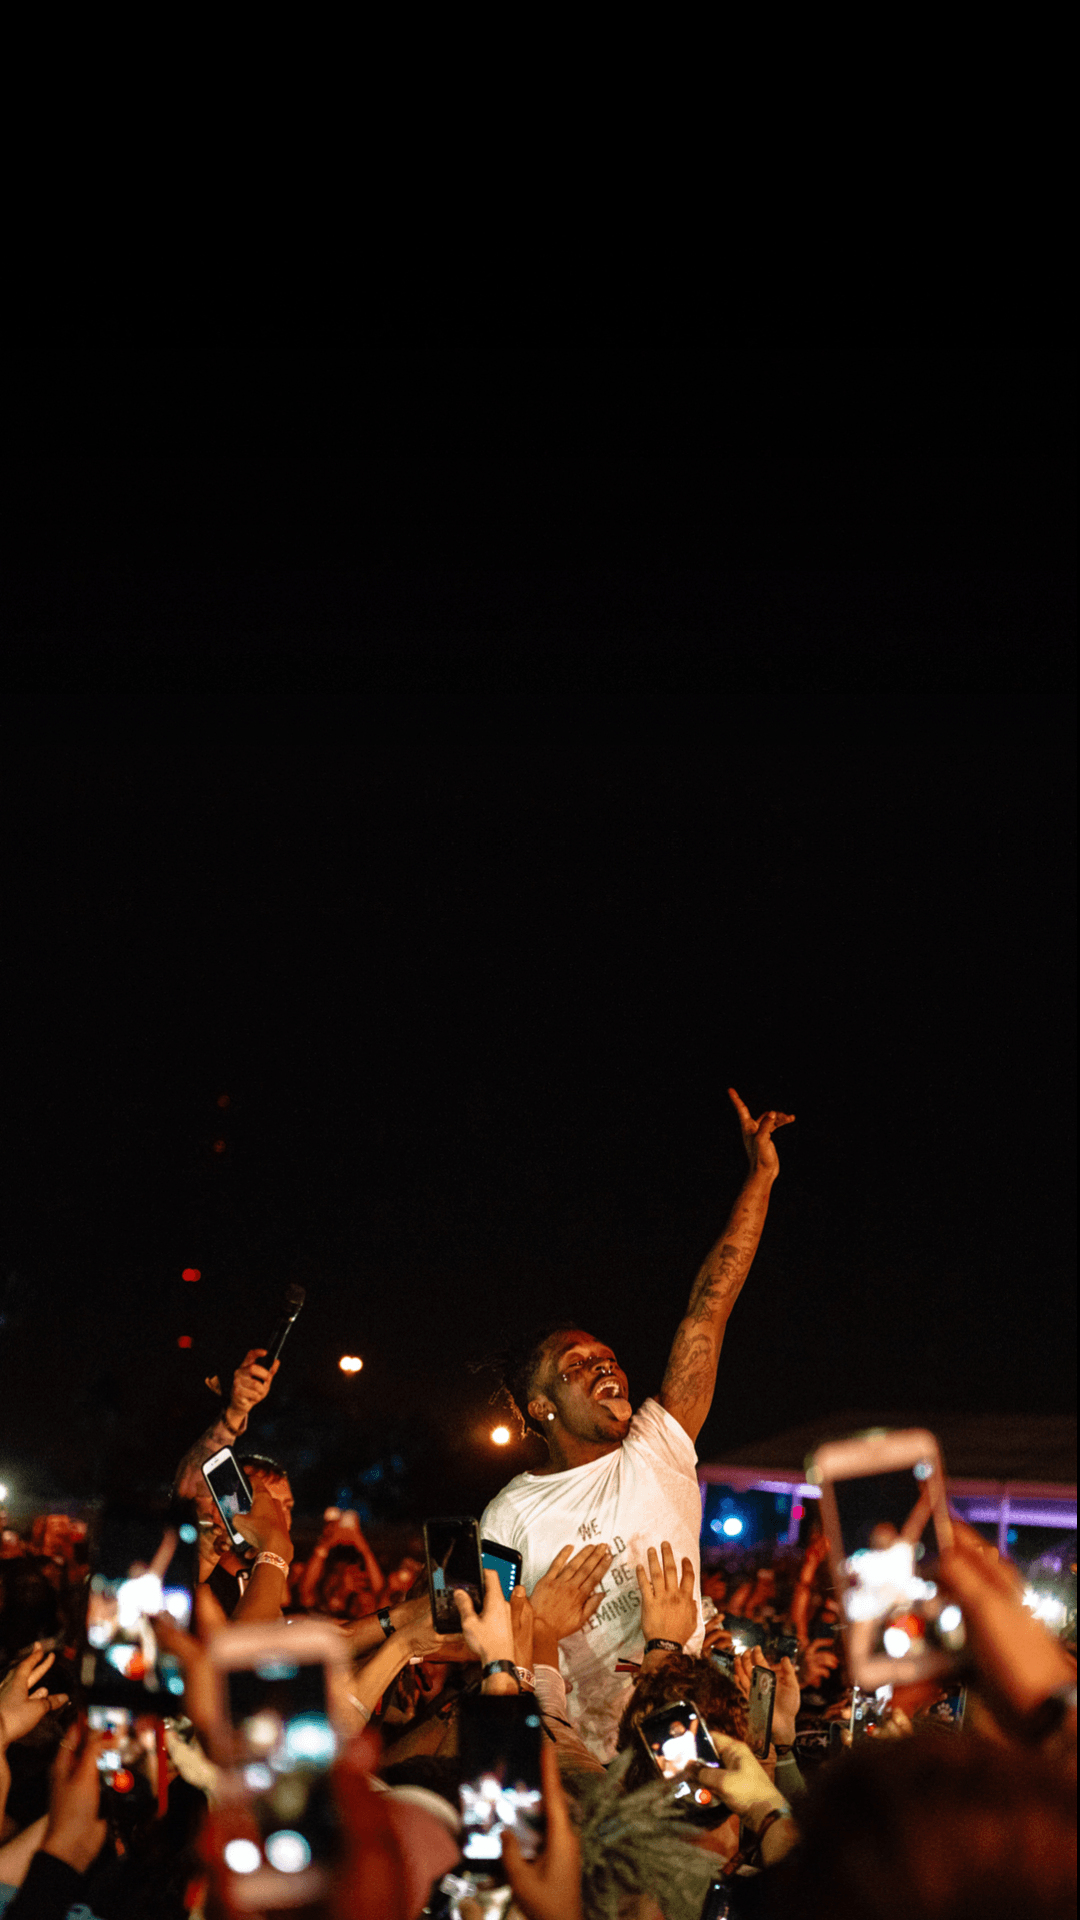 I've made another Lil Uzi Vert wallpaper for phones 1080x1920